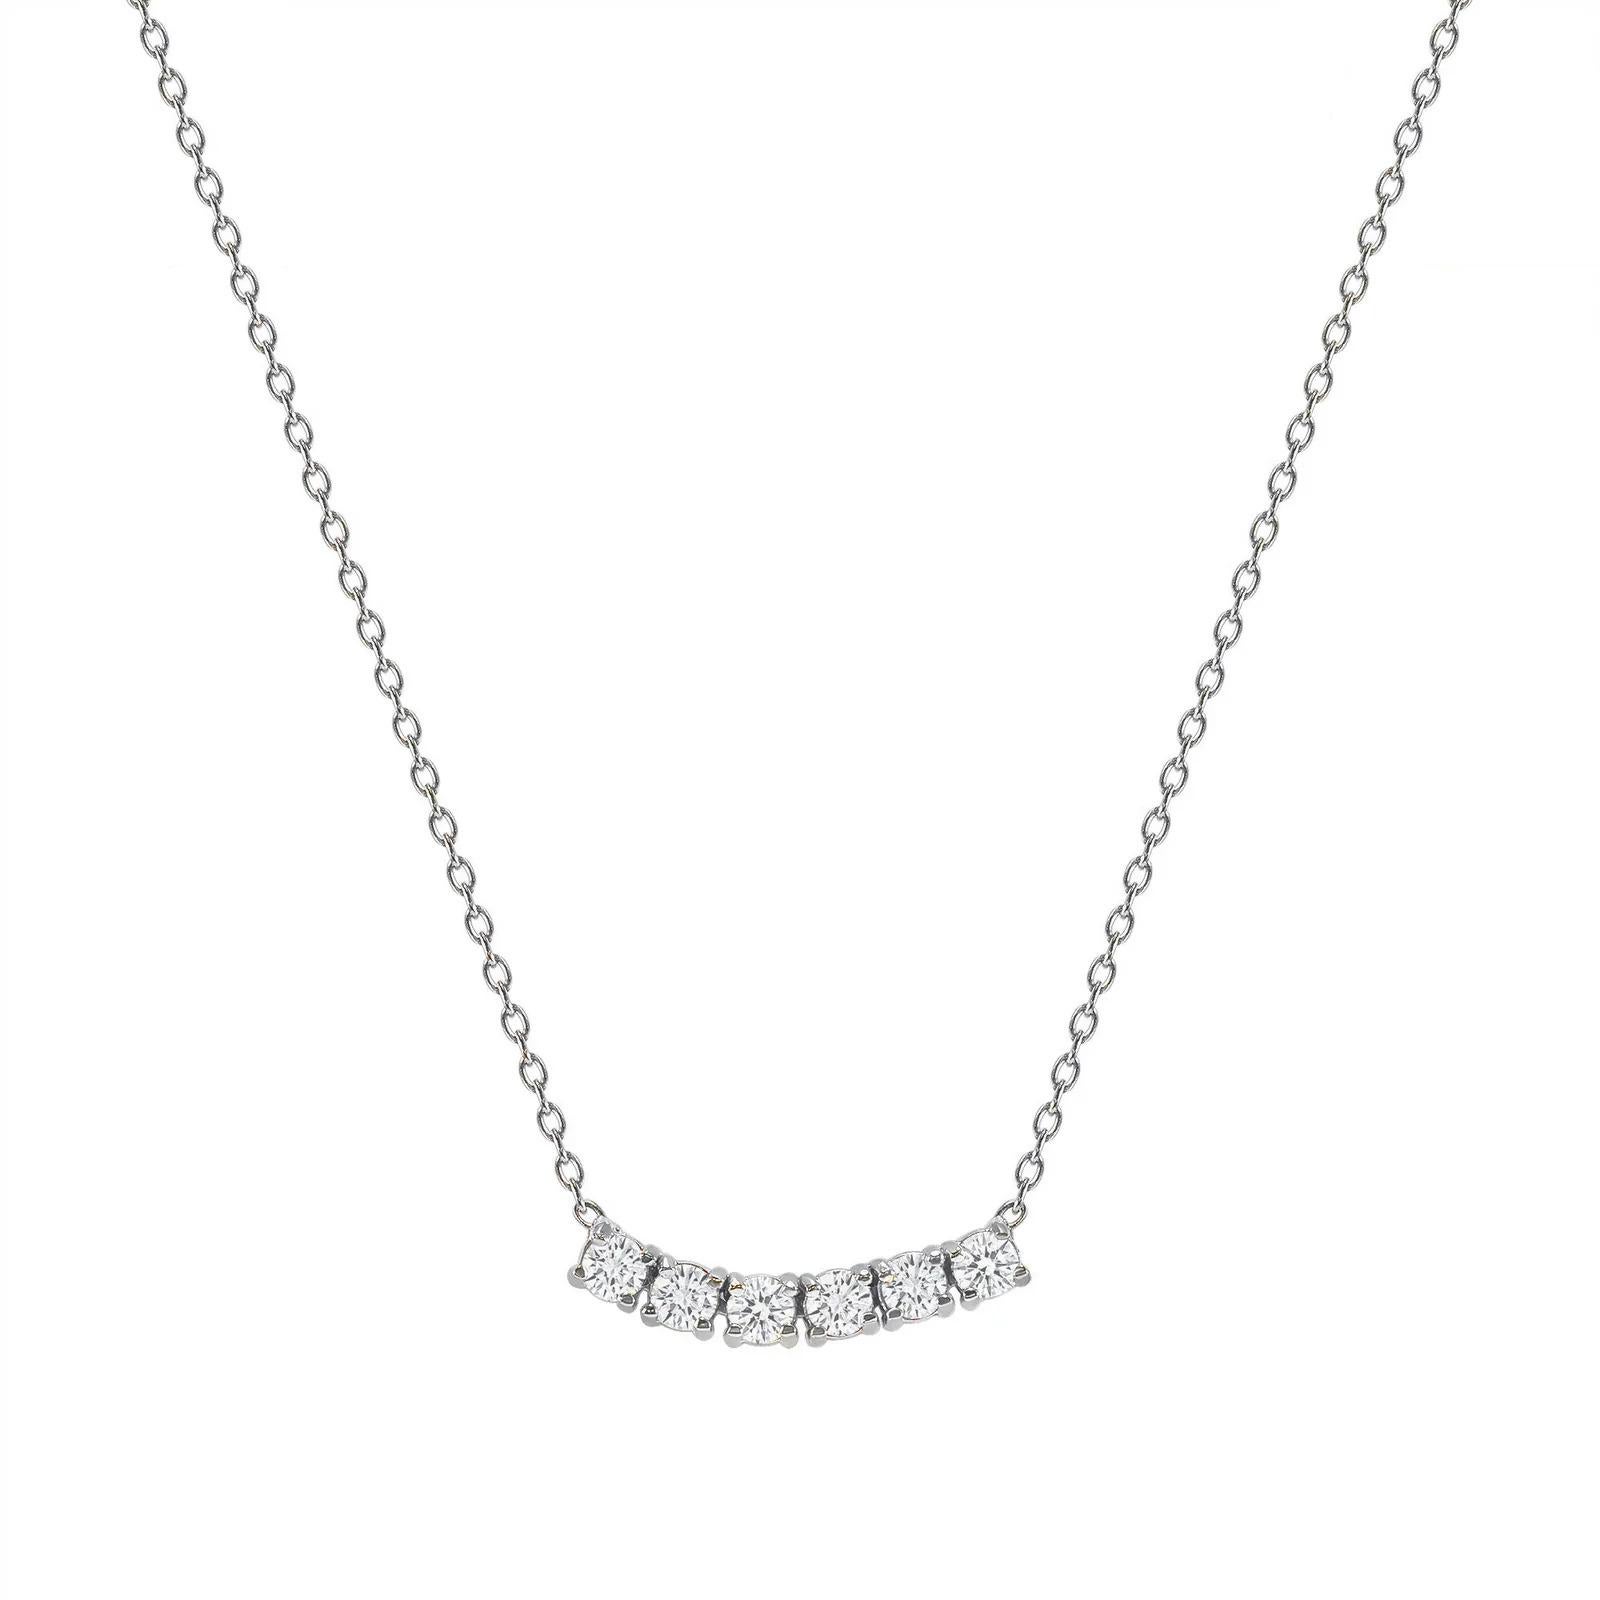 This petite, curved diamond necklace is crafted with gorgeous 14k gold set with six round diamonds.  

Gold: 14k 
Diamond Total Carats: 1ct
Diamond Cut: Round (6 diamonds)
Diamond Clarity: VS
Diamond Color: F
Color: White Gold
Necklace Length: 22